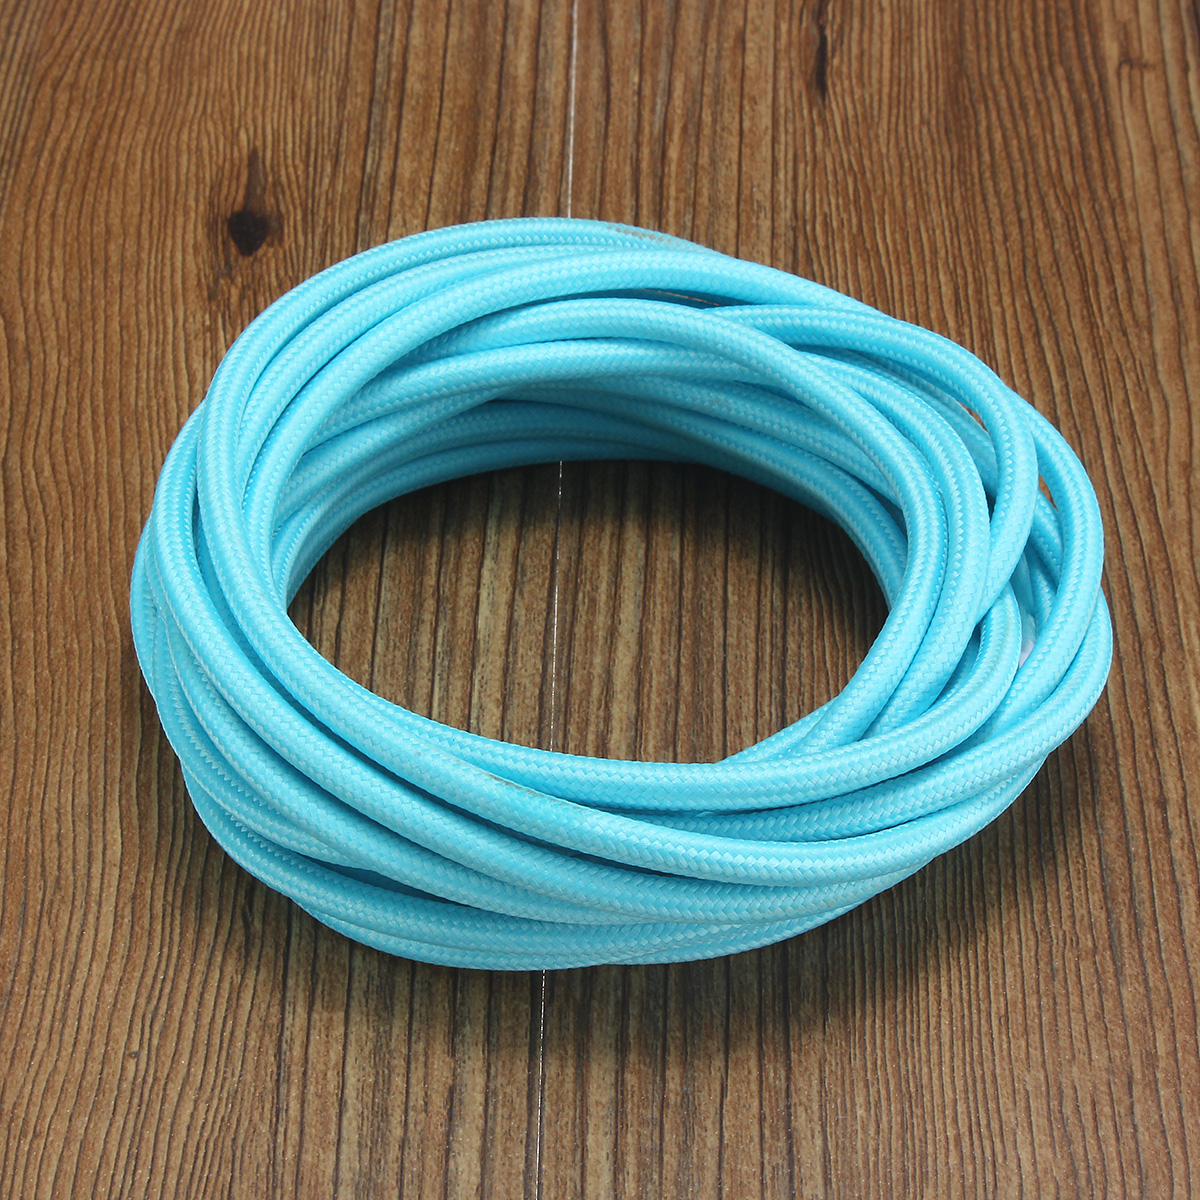 5M-2-Cord-Color-Vintage-Twist-Braided-Fabric-Light-Cable-Electric-Wire-1069142-7